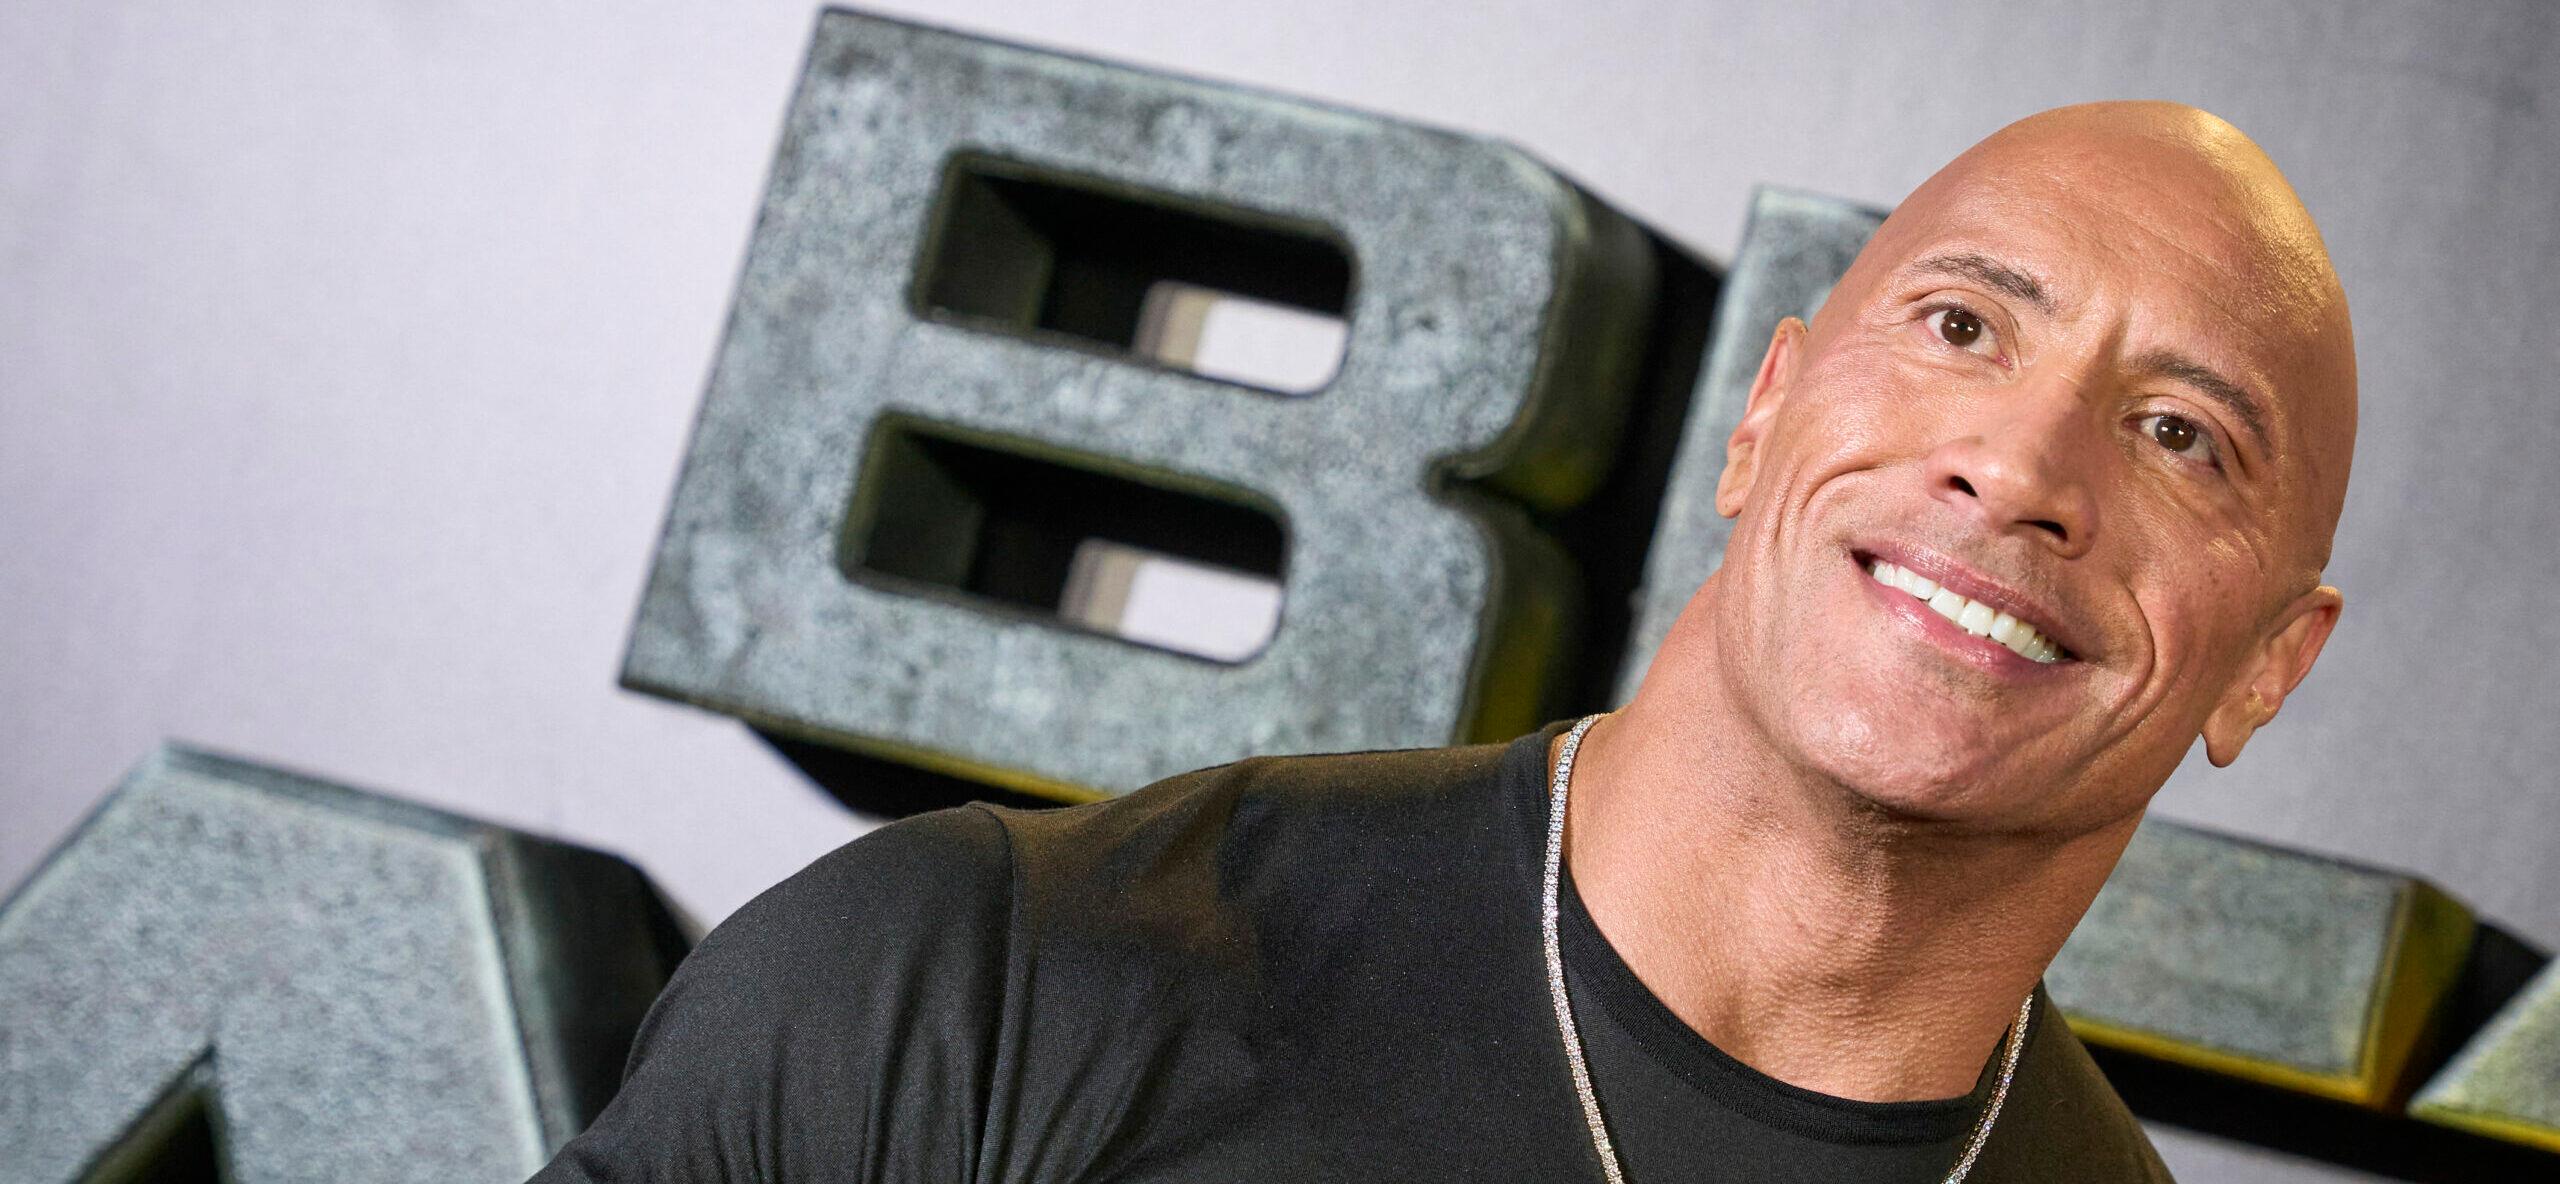 The Rock’s ‘Black Adam’ Soars To Second Week Atop Box Office And Reaches $250 Million Worldwide